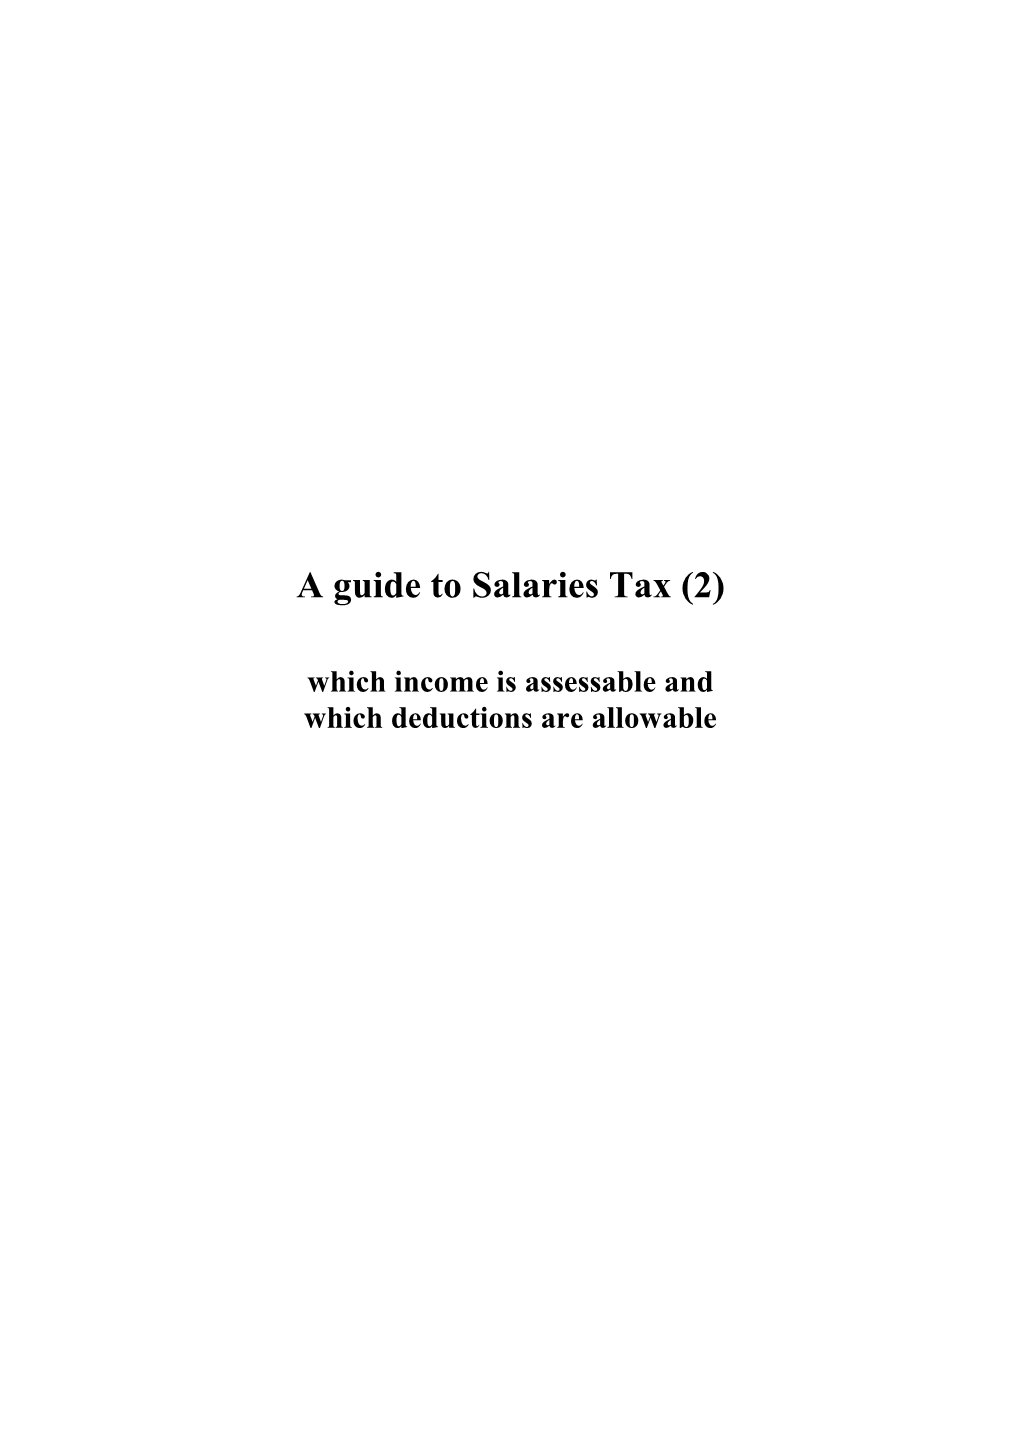 A Guide to Salaries Tax (2) [Which Income Is Assessable and Which Deductions Are Allowable]